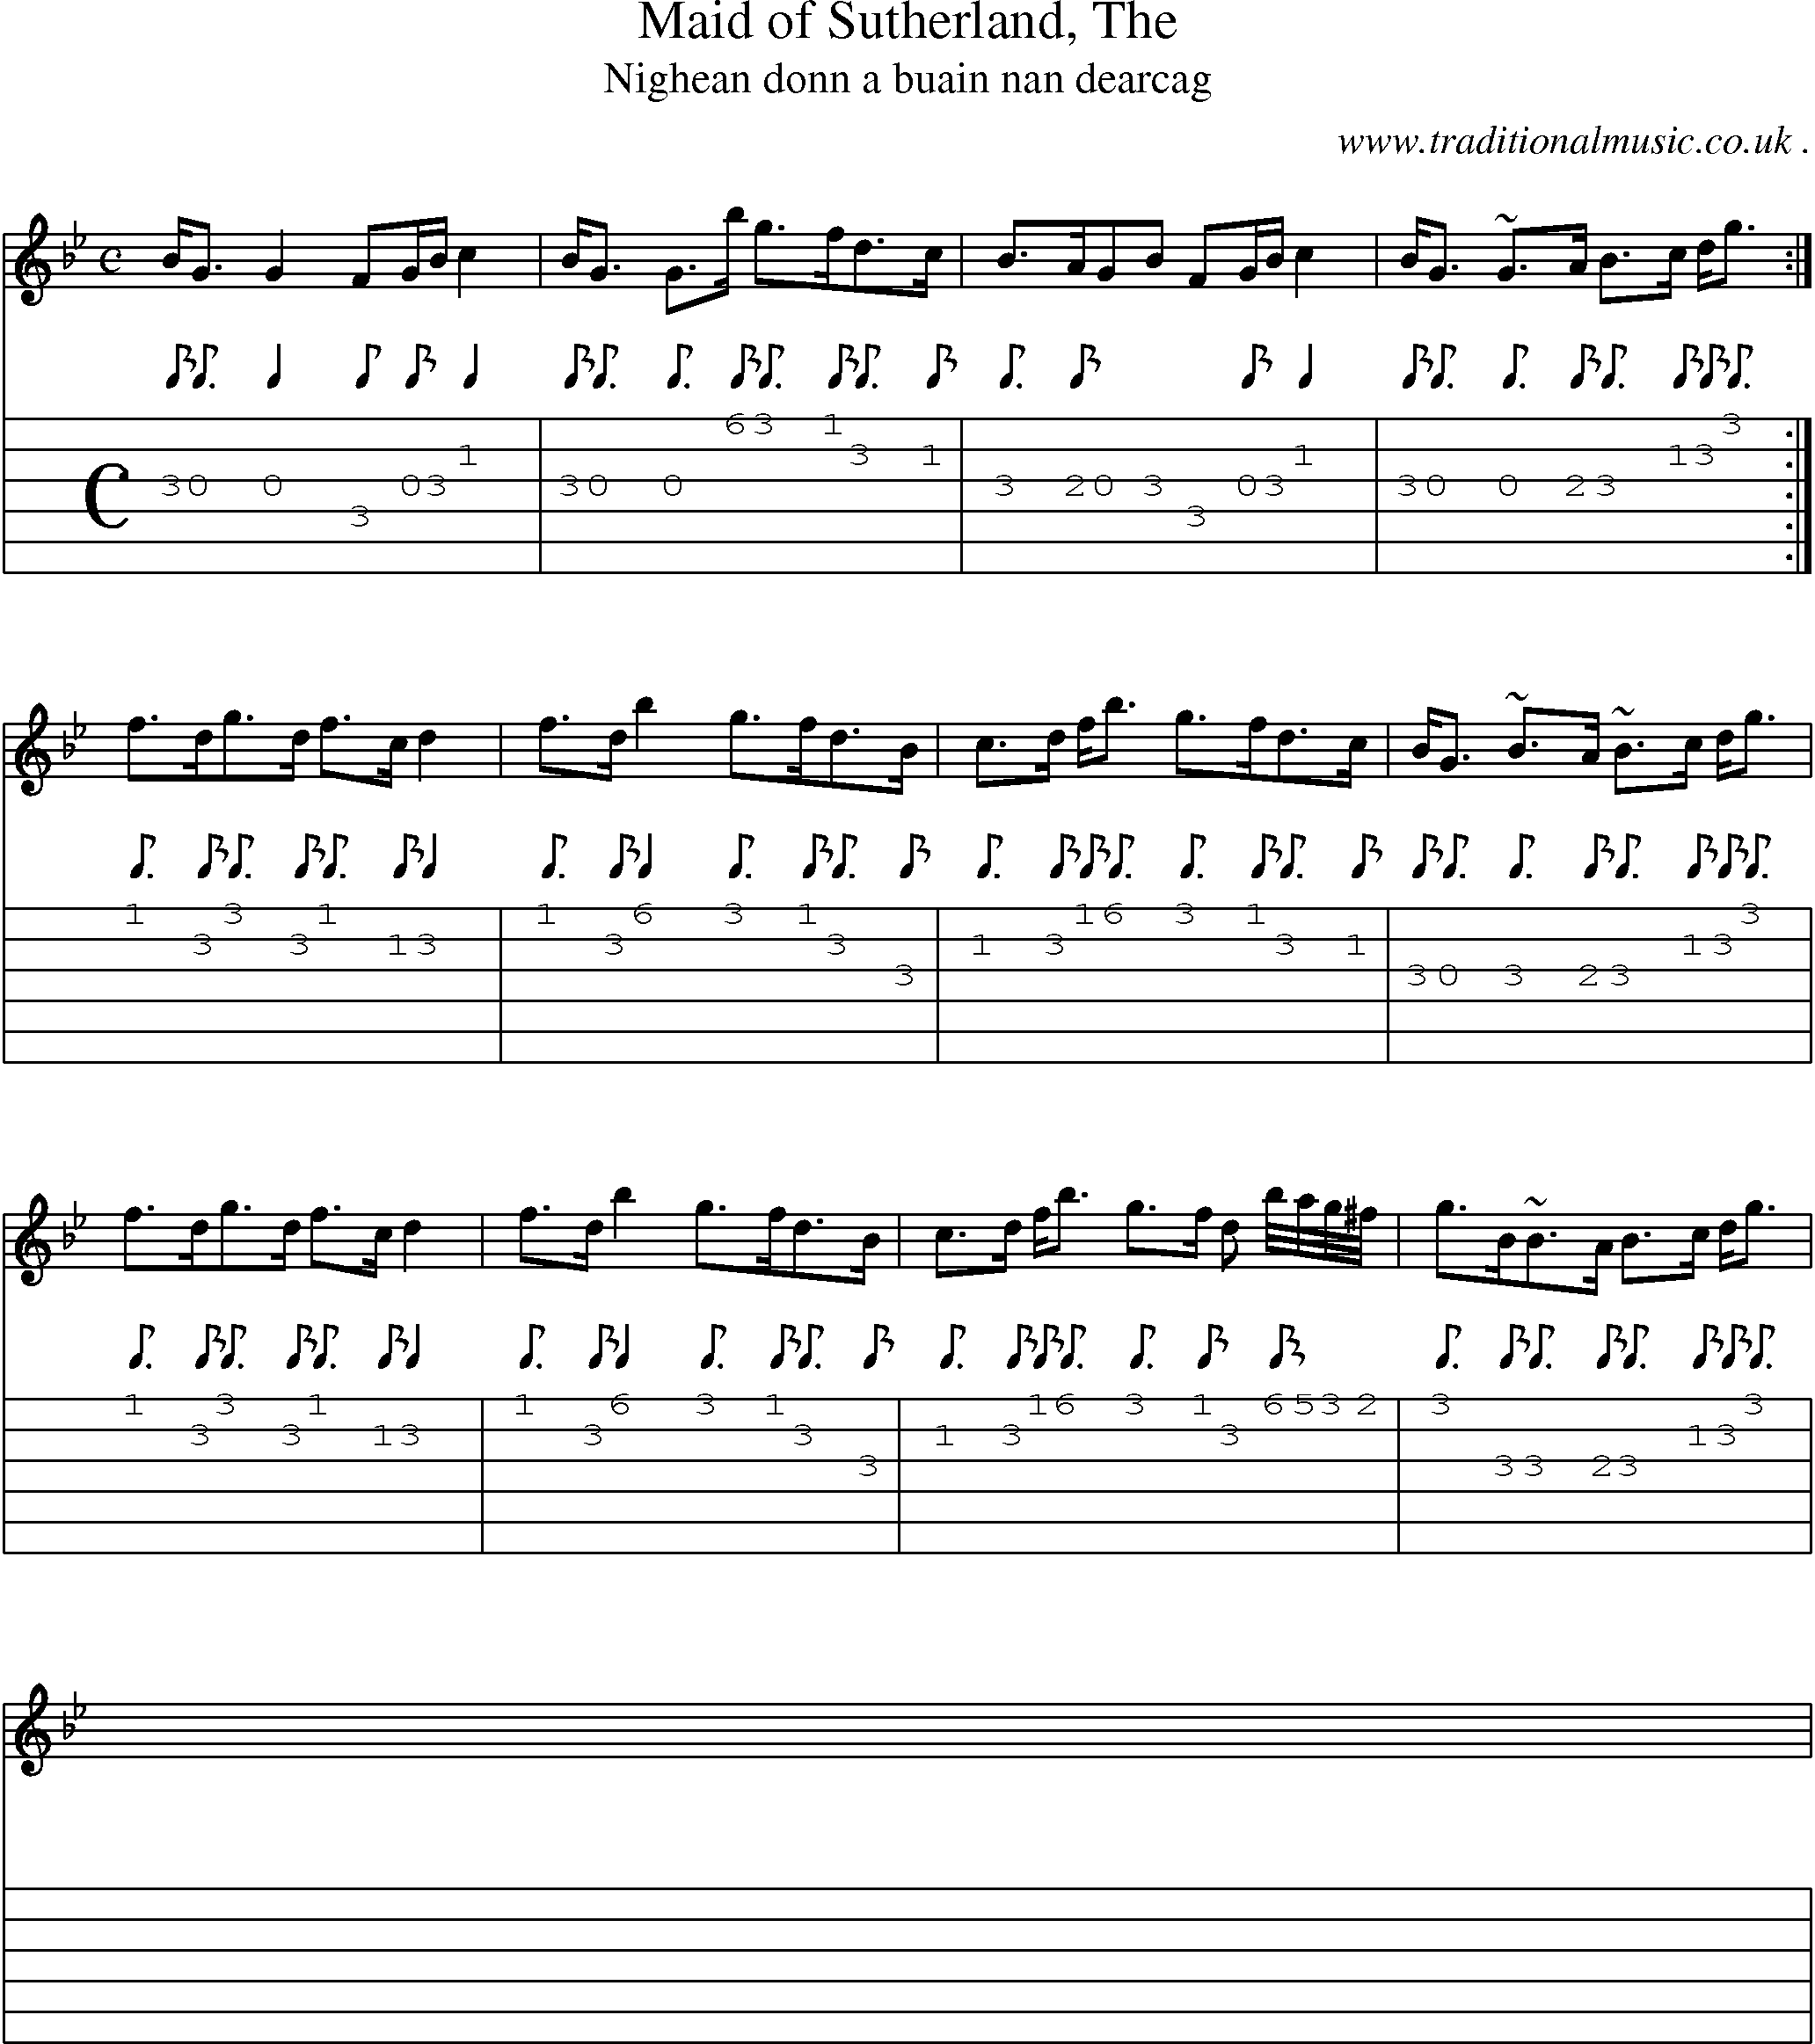 Sheet-music  score, Chords and Guitar Tabs for Maid Of Sutherland The